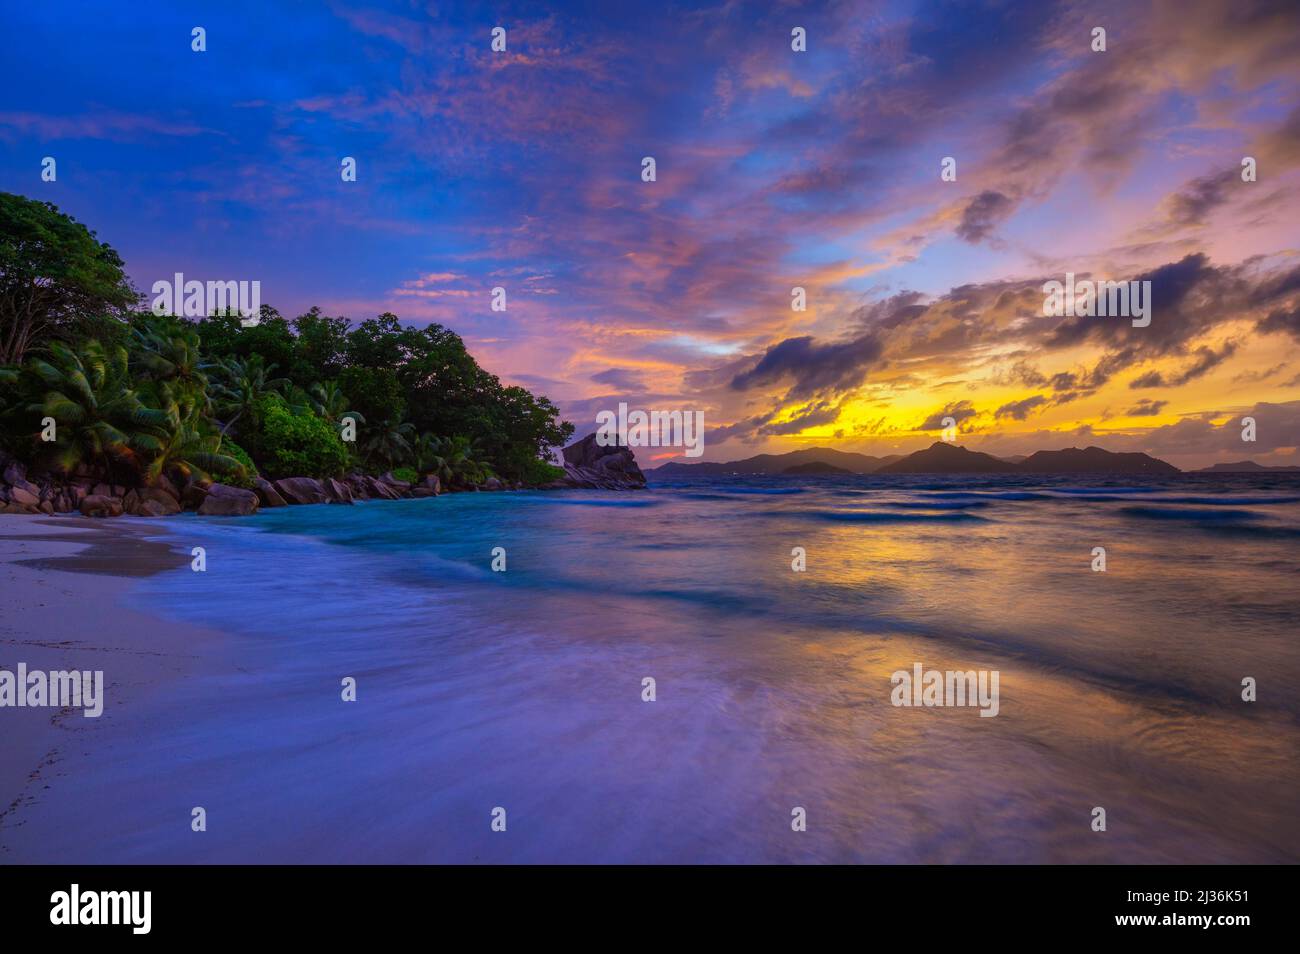 Colorful sunset over Anse Severe Beach at the La Digue Island, Seychelles Stock Photo